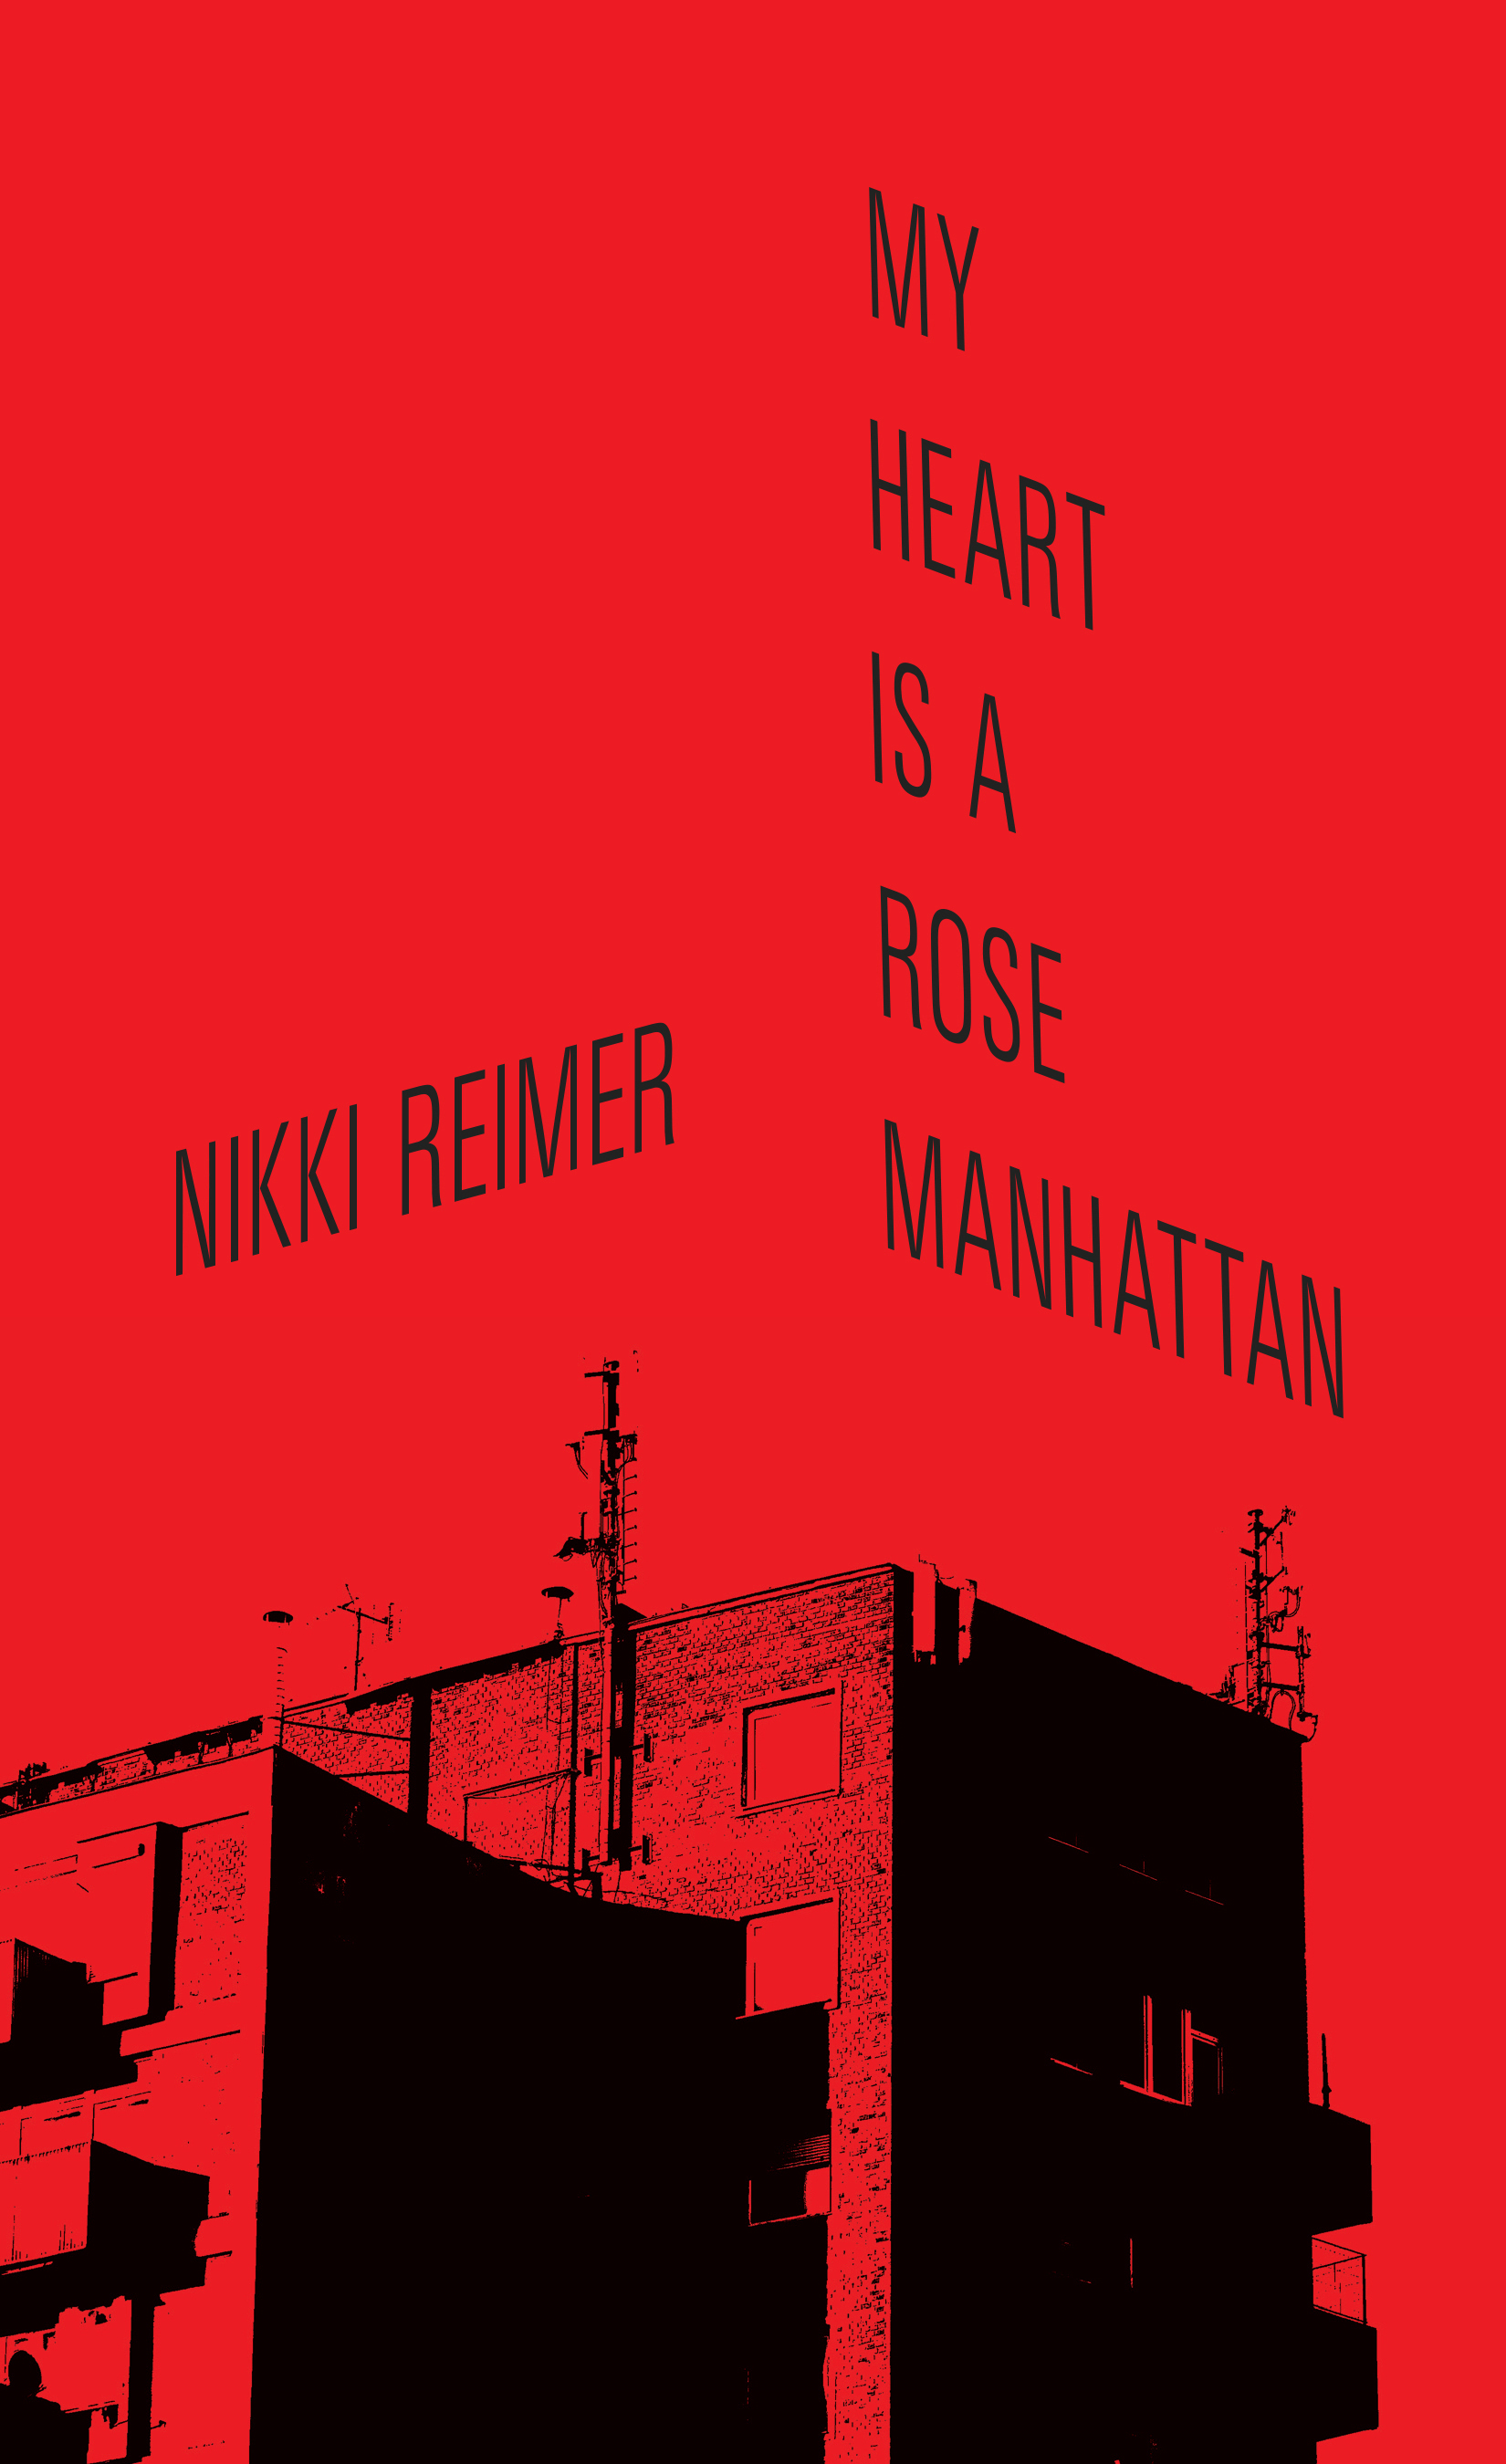 My Heart is a Rose Manhattan Front Cover